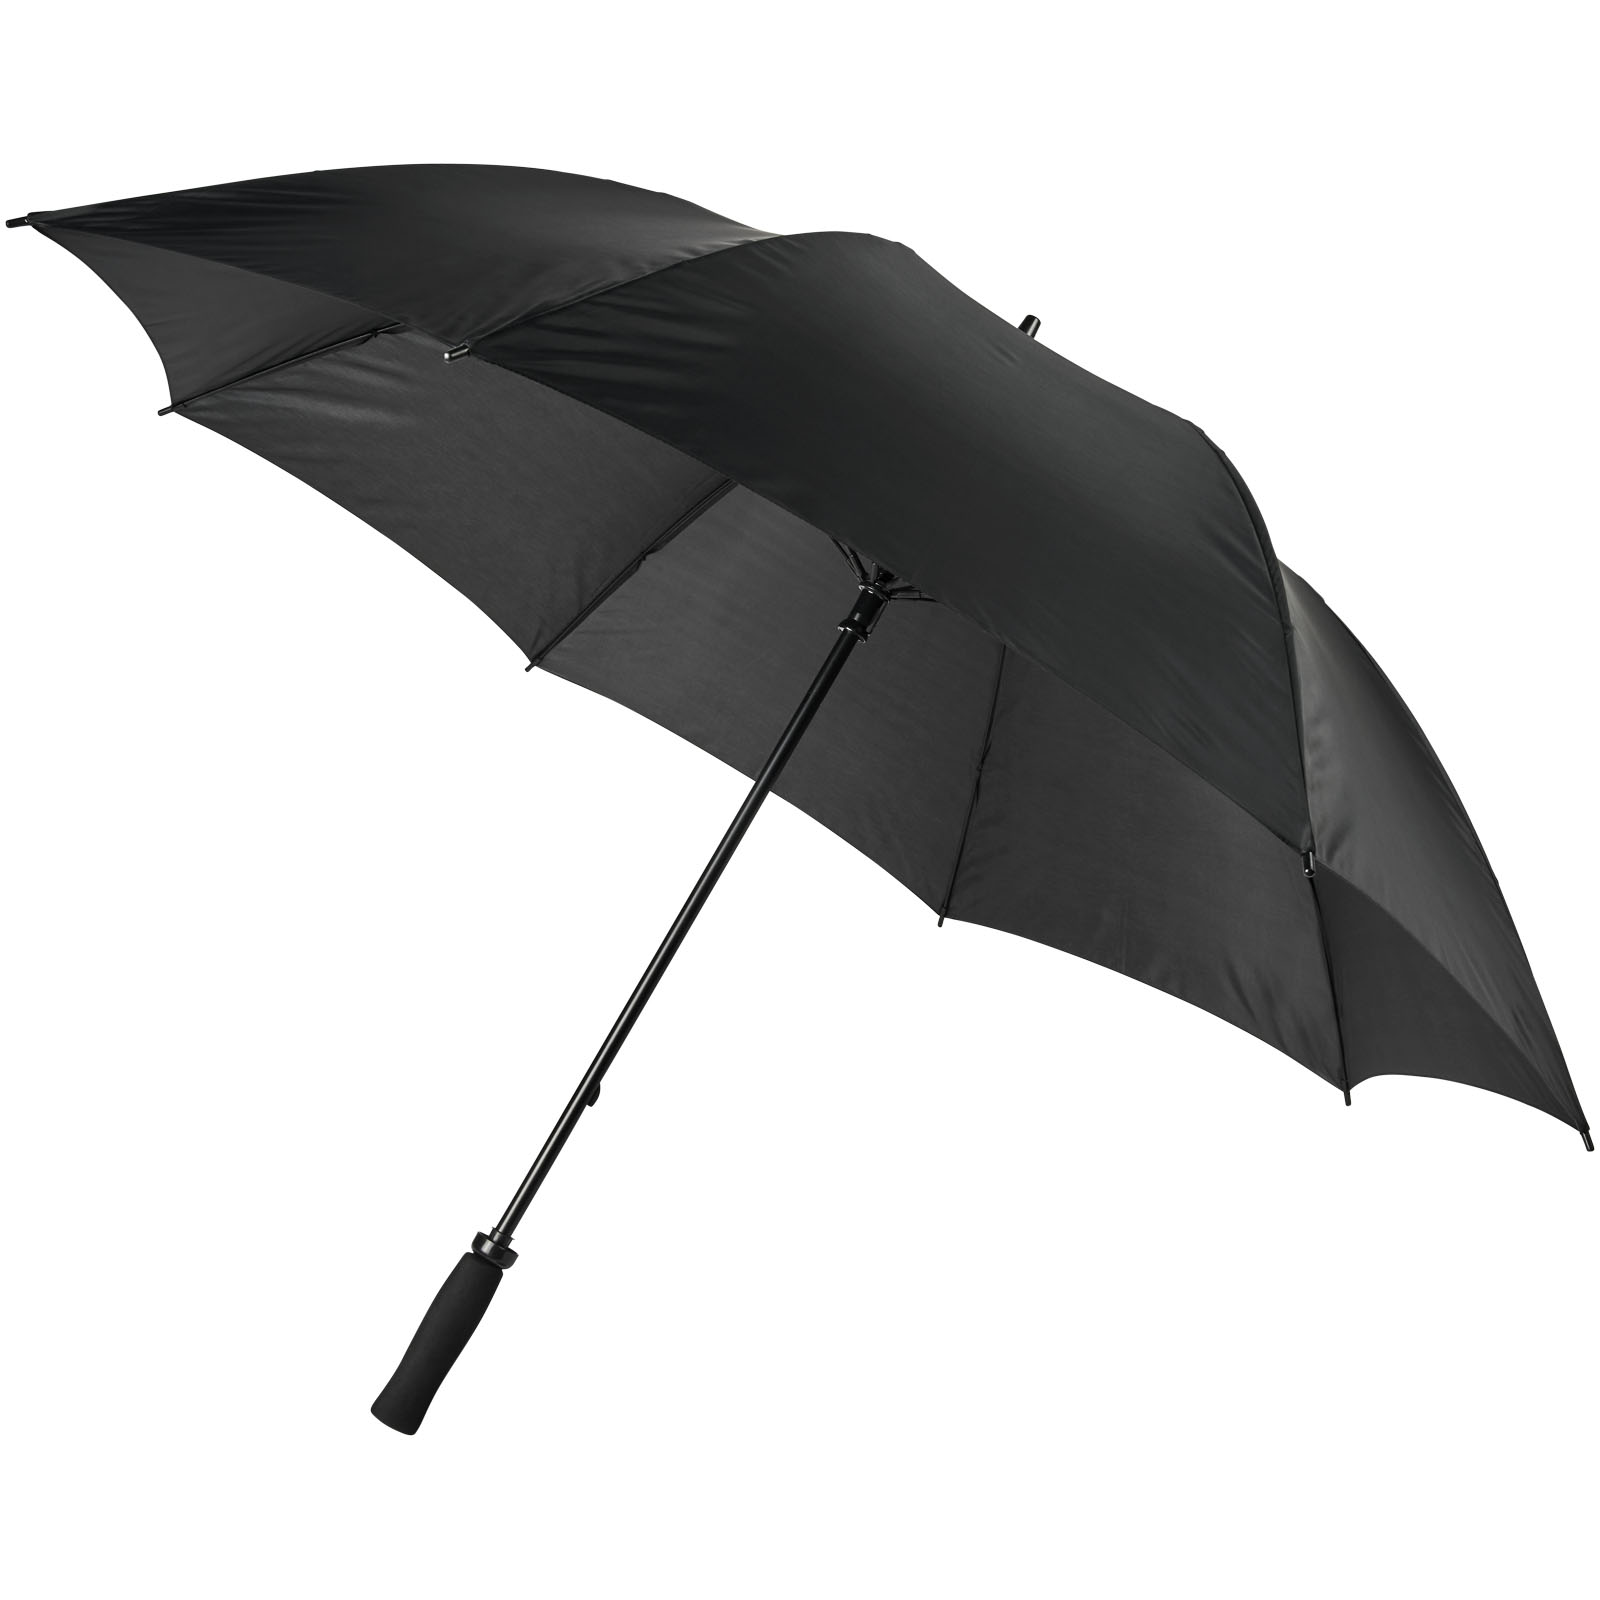 An umbrella designed to comfortably provide cover for two people on the golf course. - Abbeythorpe